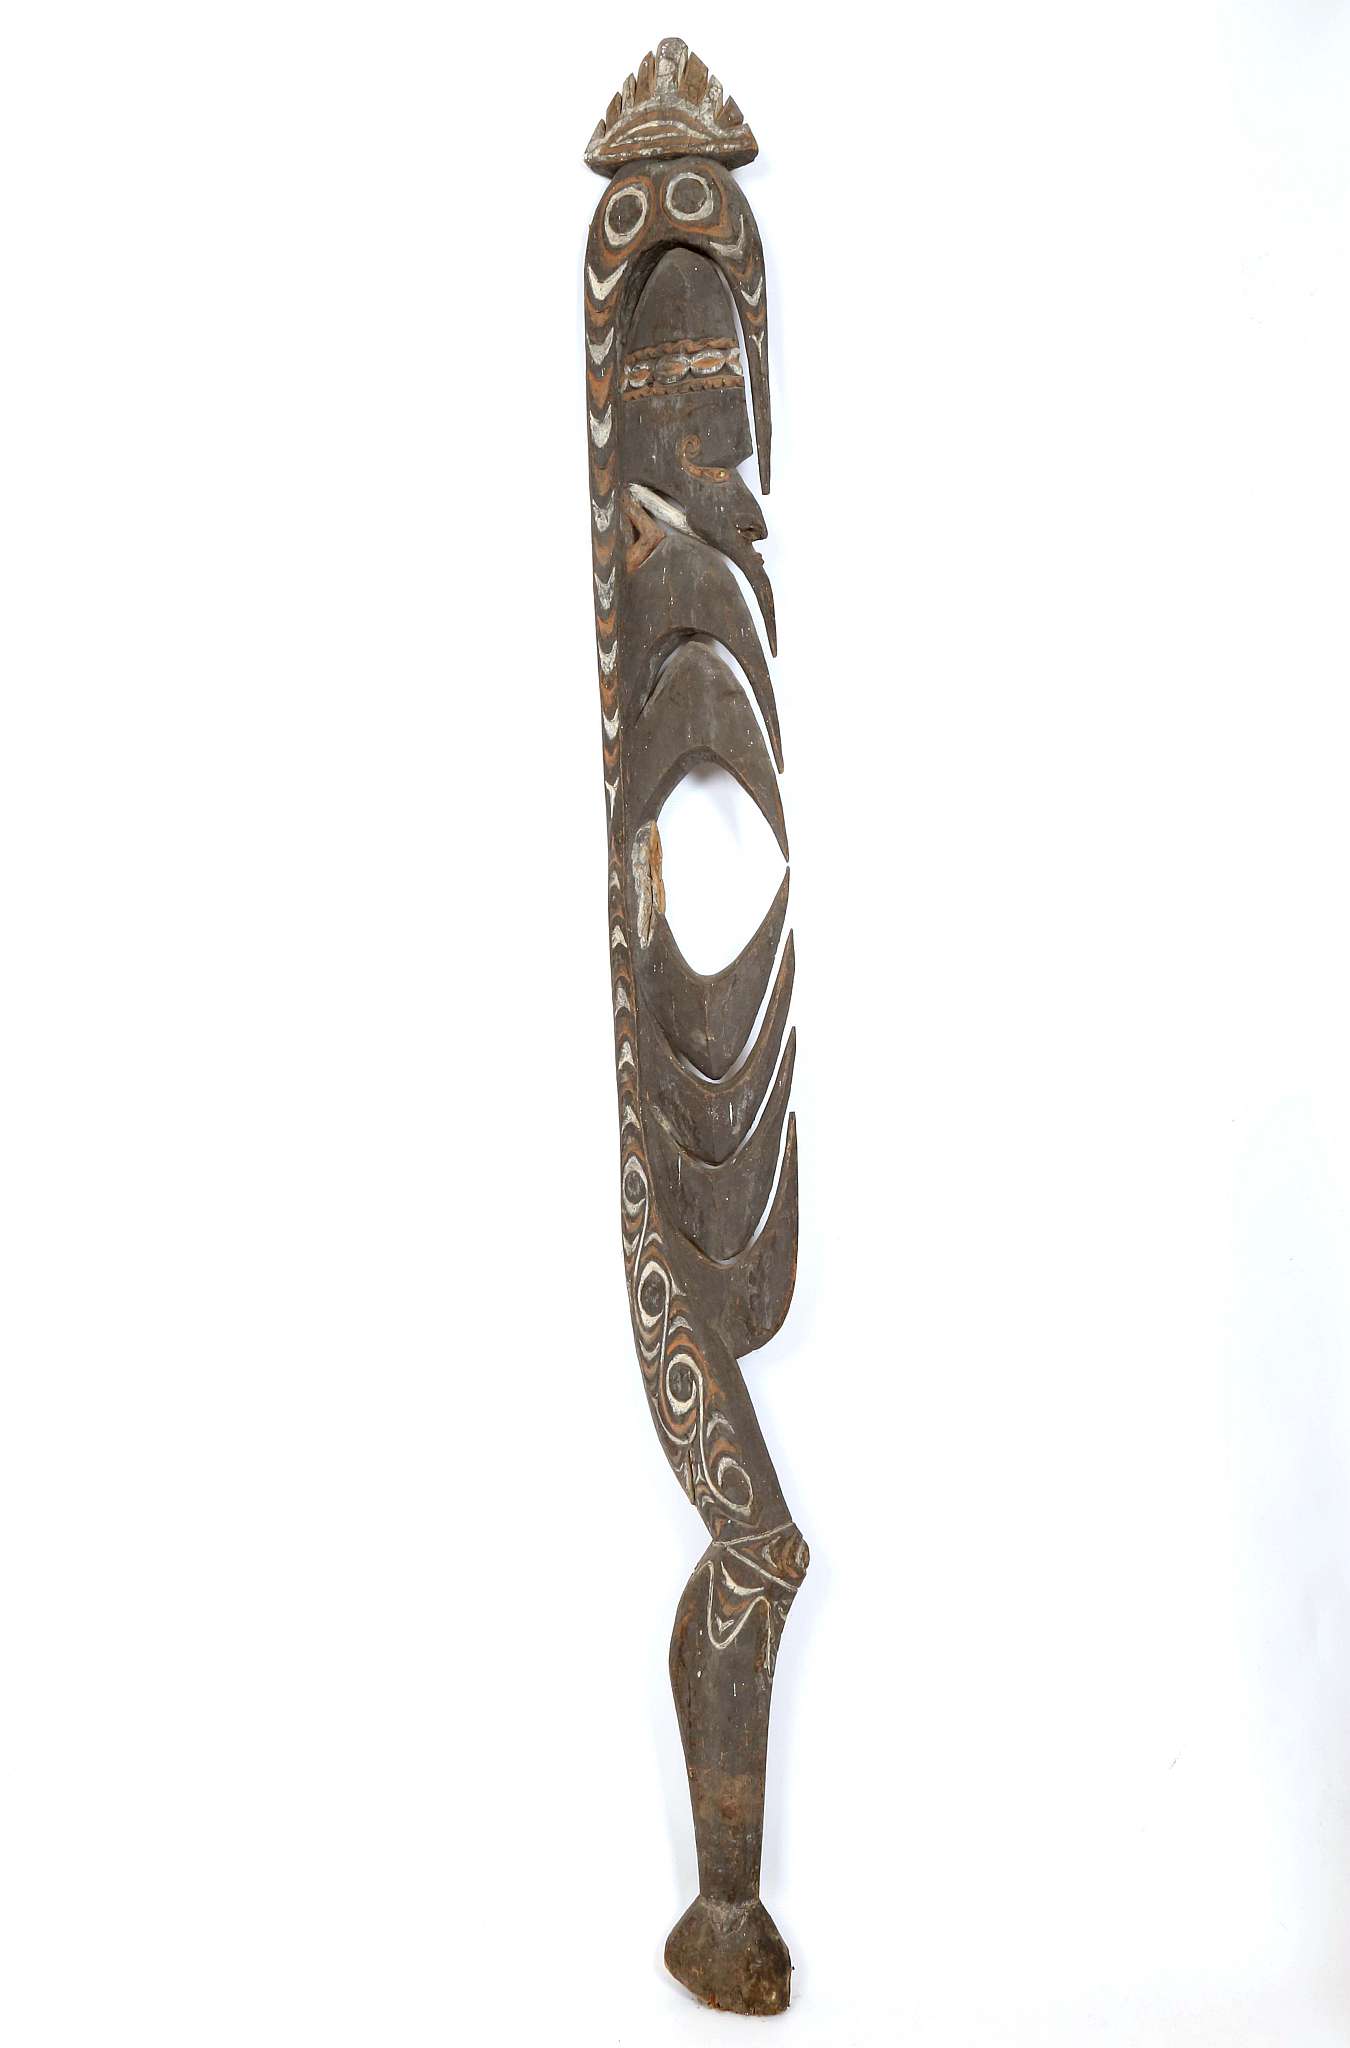 A KOREWORI 'YIPWON' HOOK FIGURE, PAPUA NEW GUINEA Carved from a single piece of wood, with typical